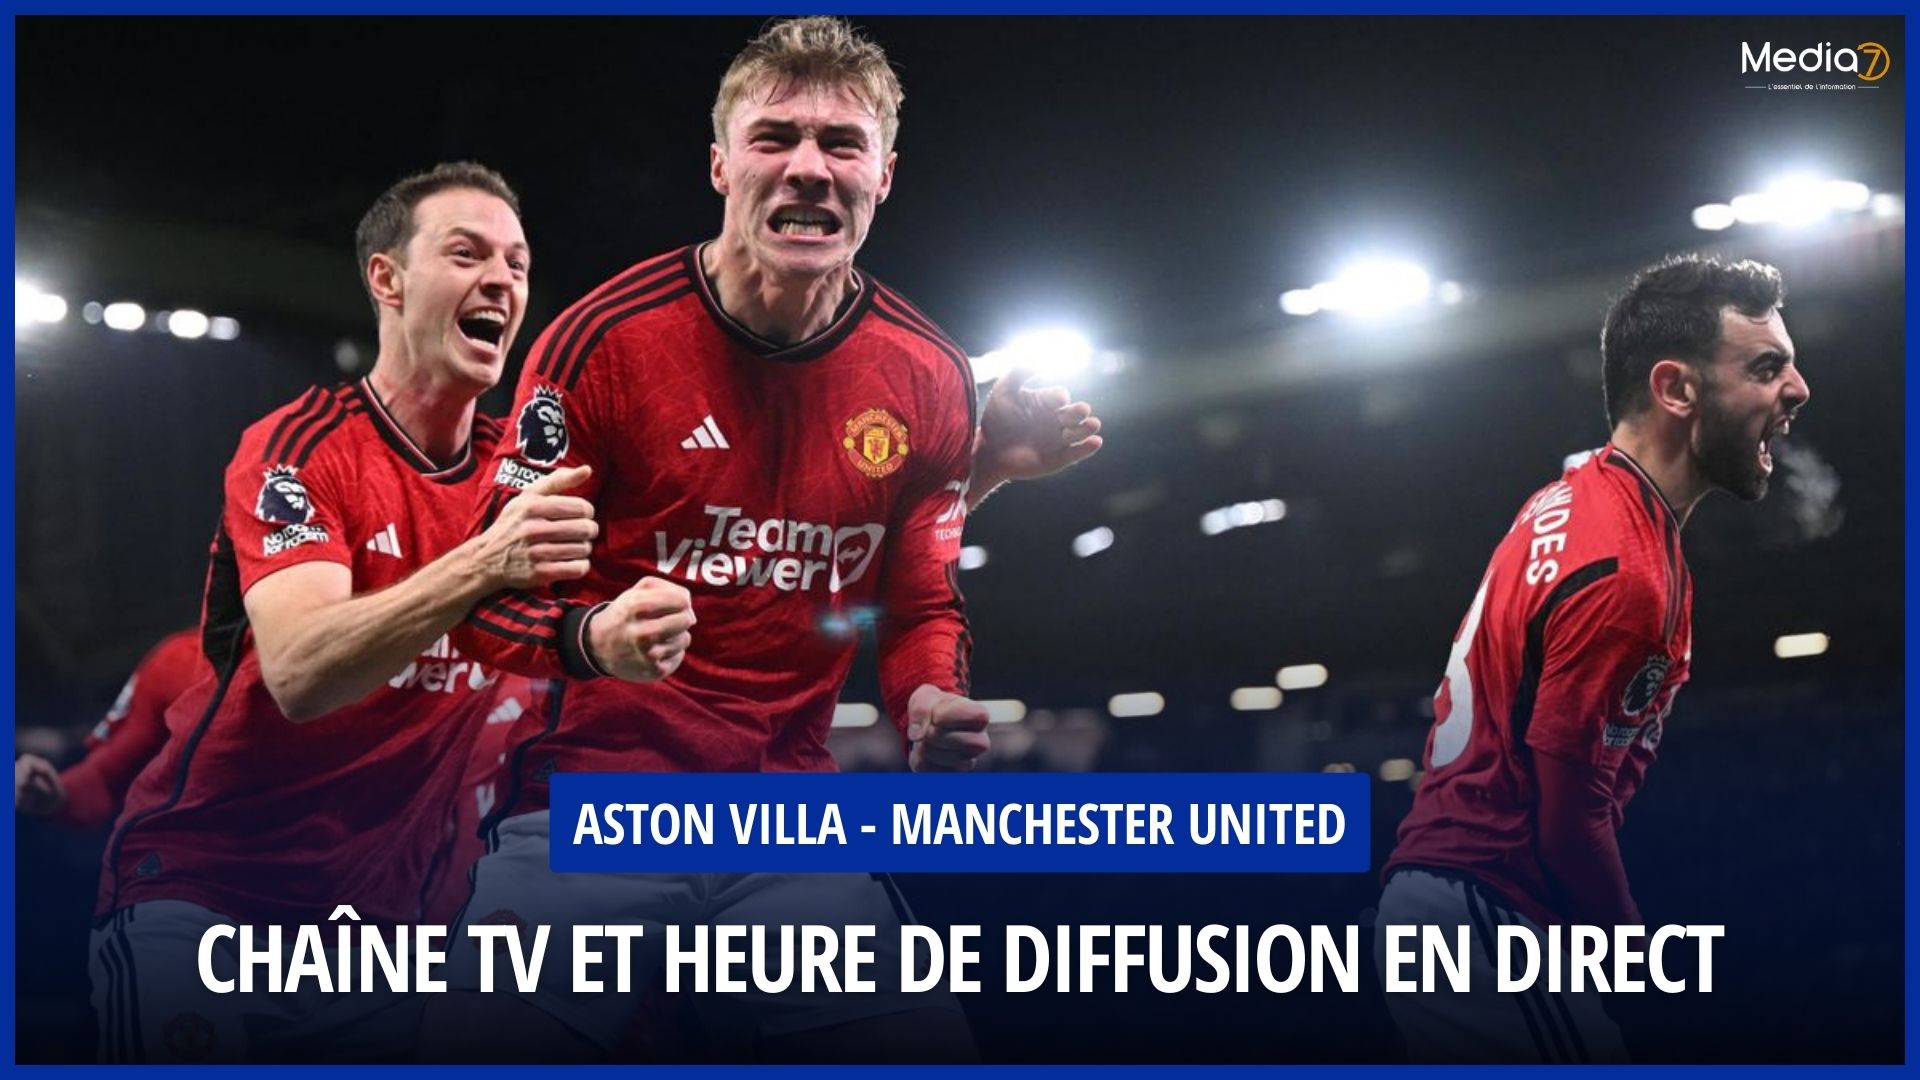 Aston Villa - Manchester United Match Live: TV Channel and Broadcast Time - Media7